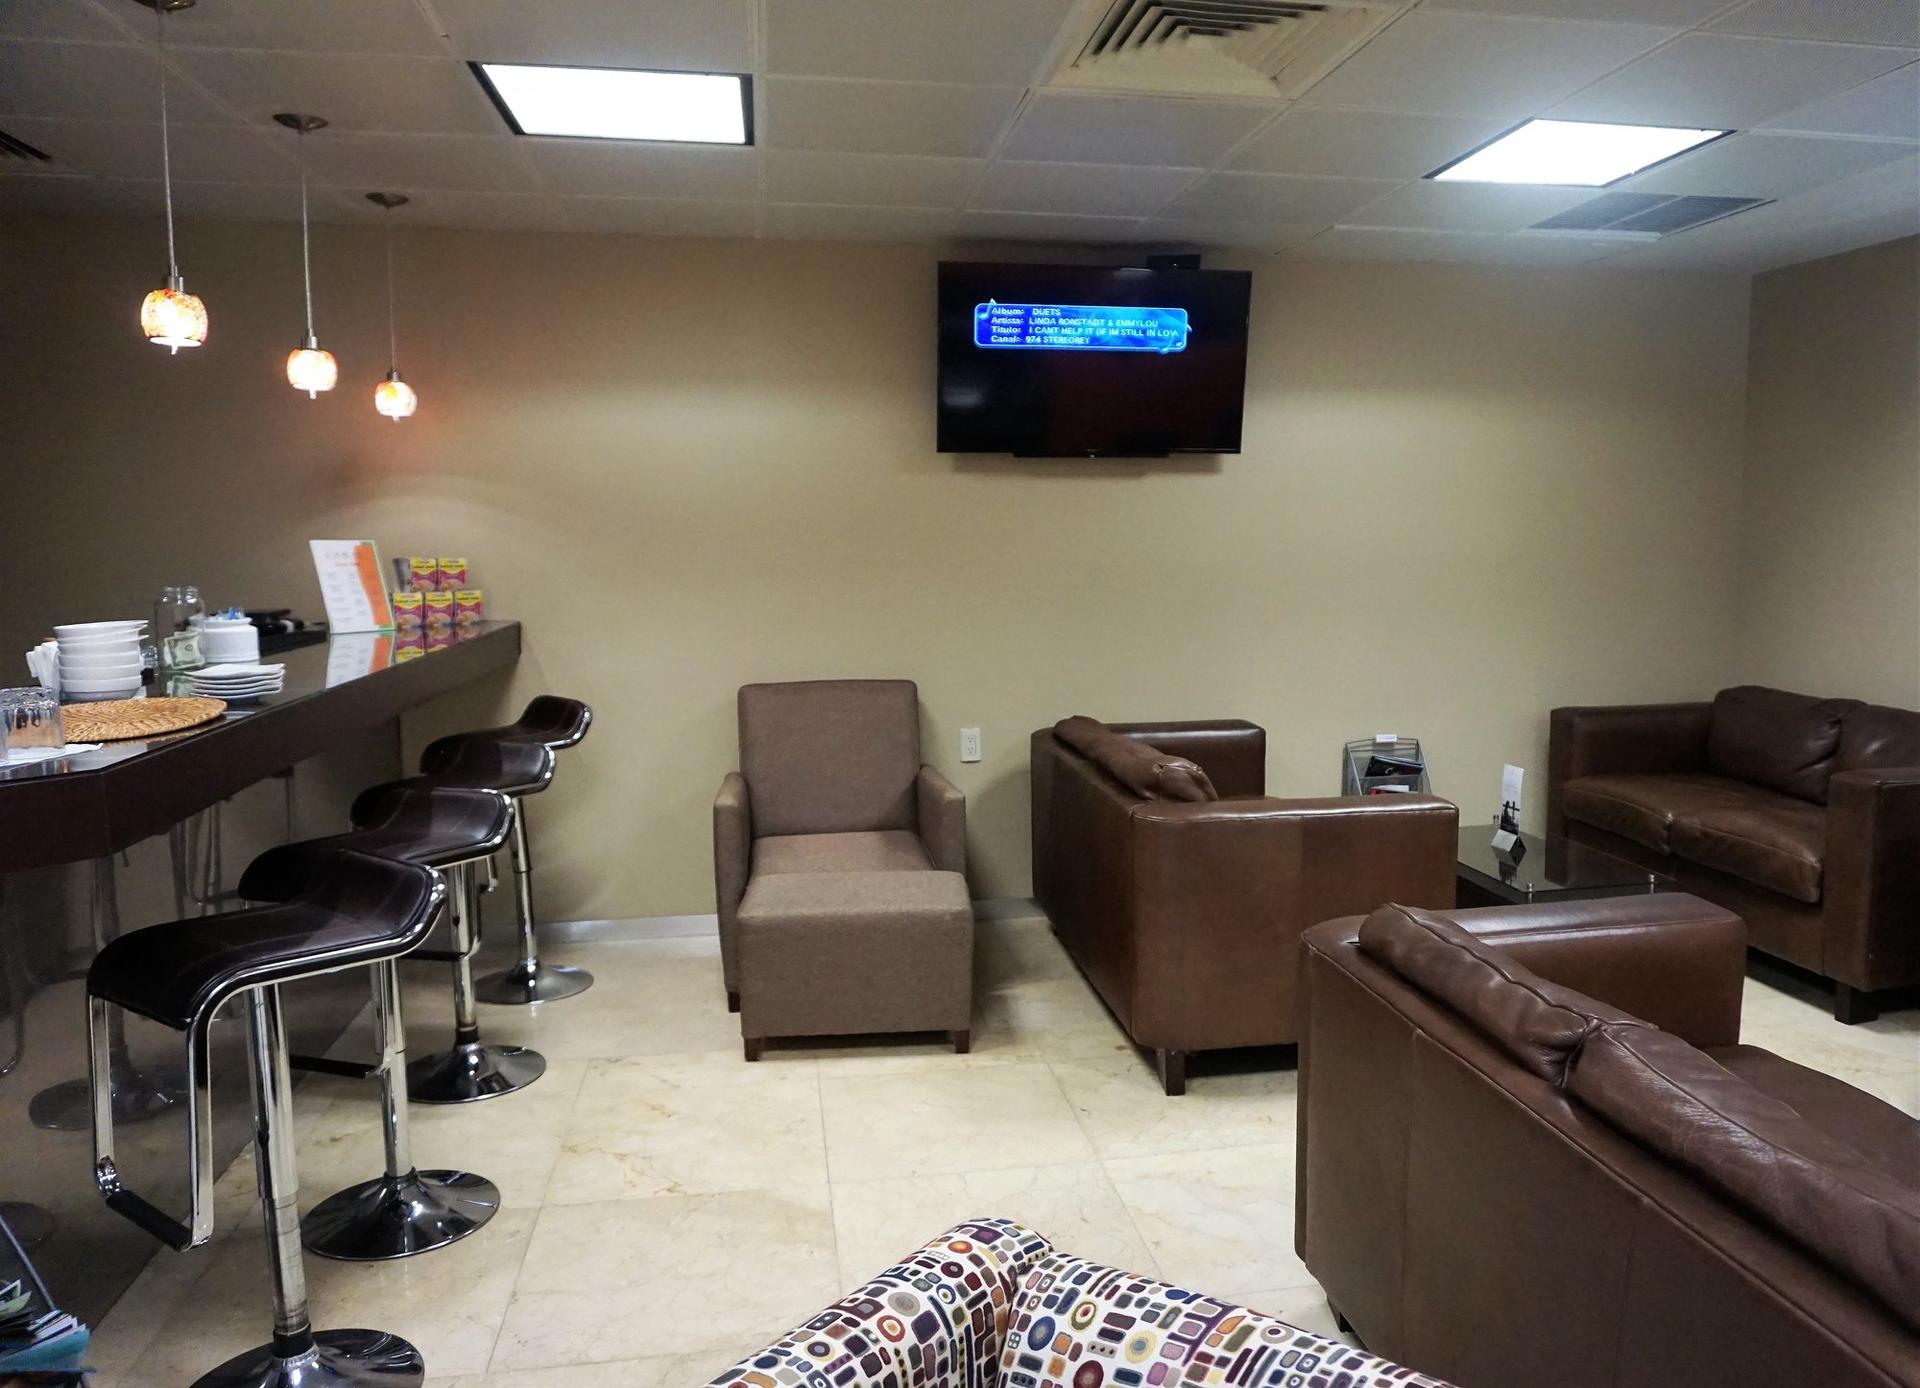 Caral VIP Lounge image 22 of 35